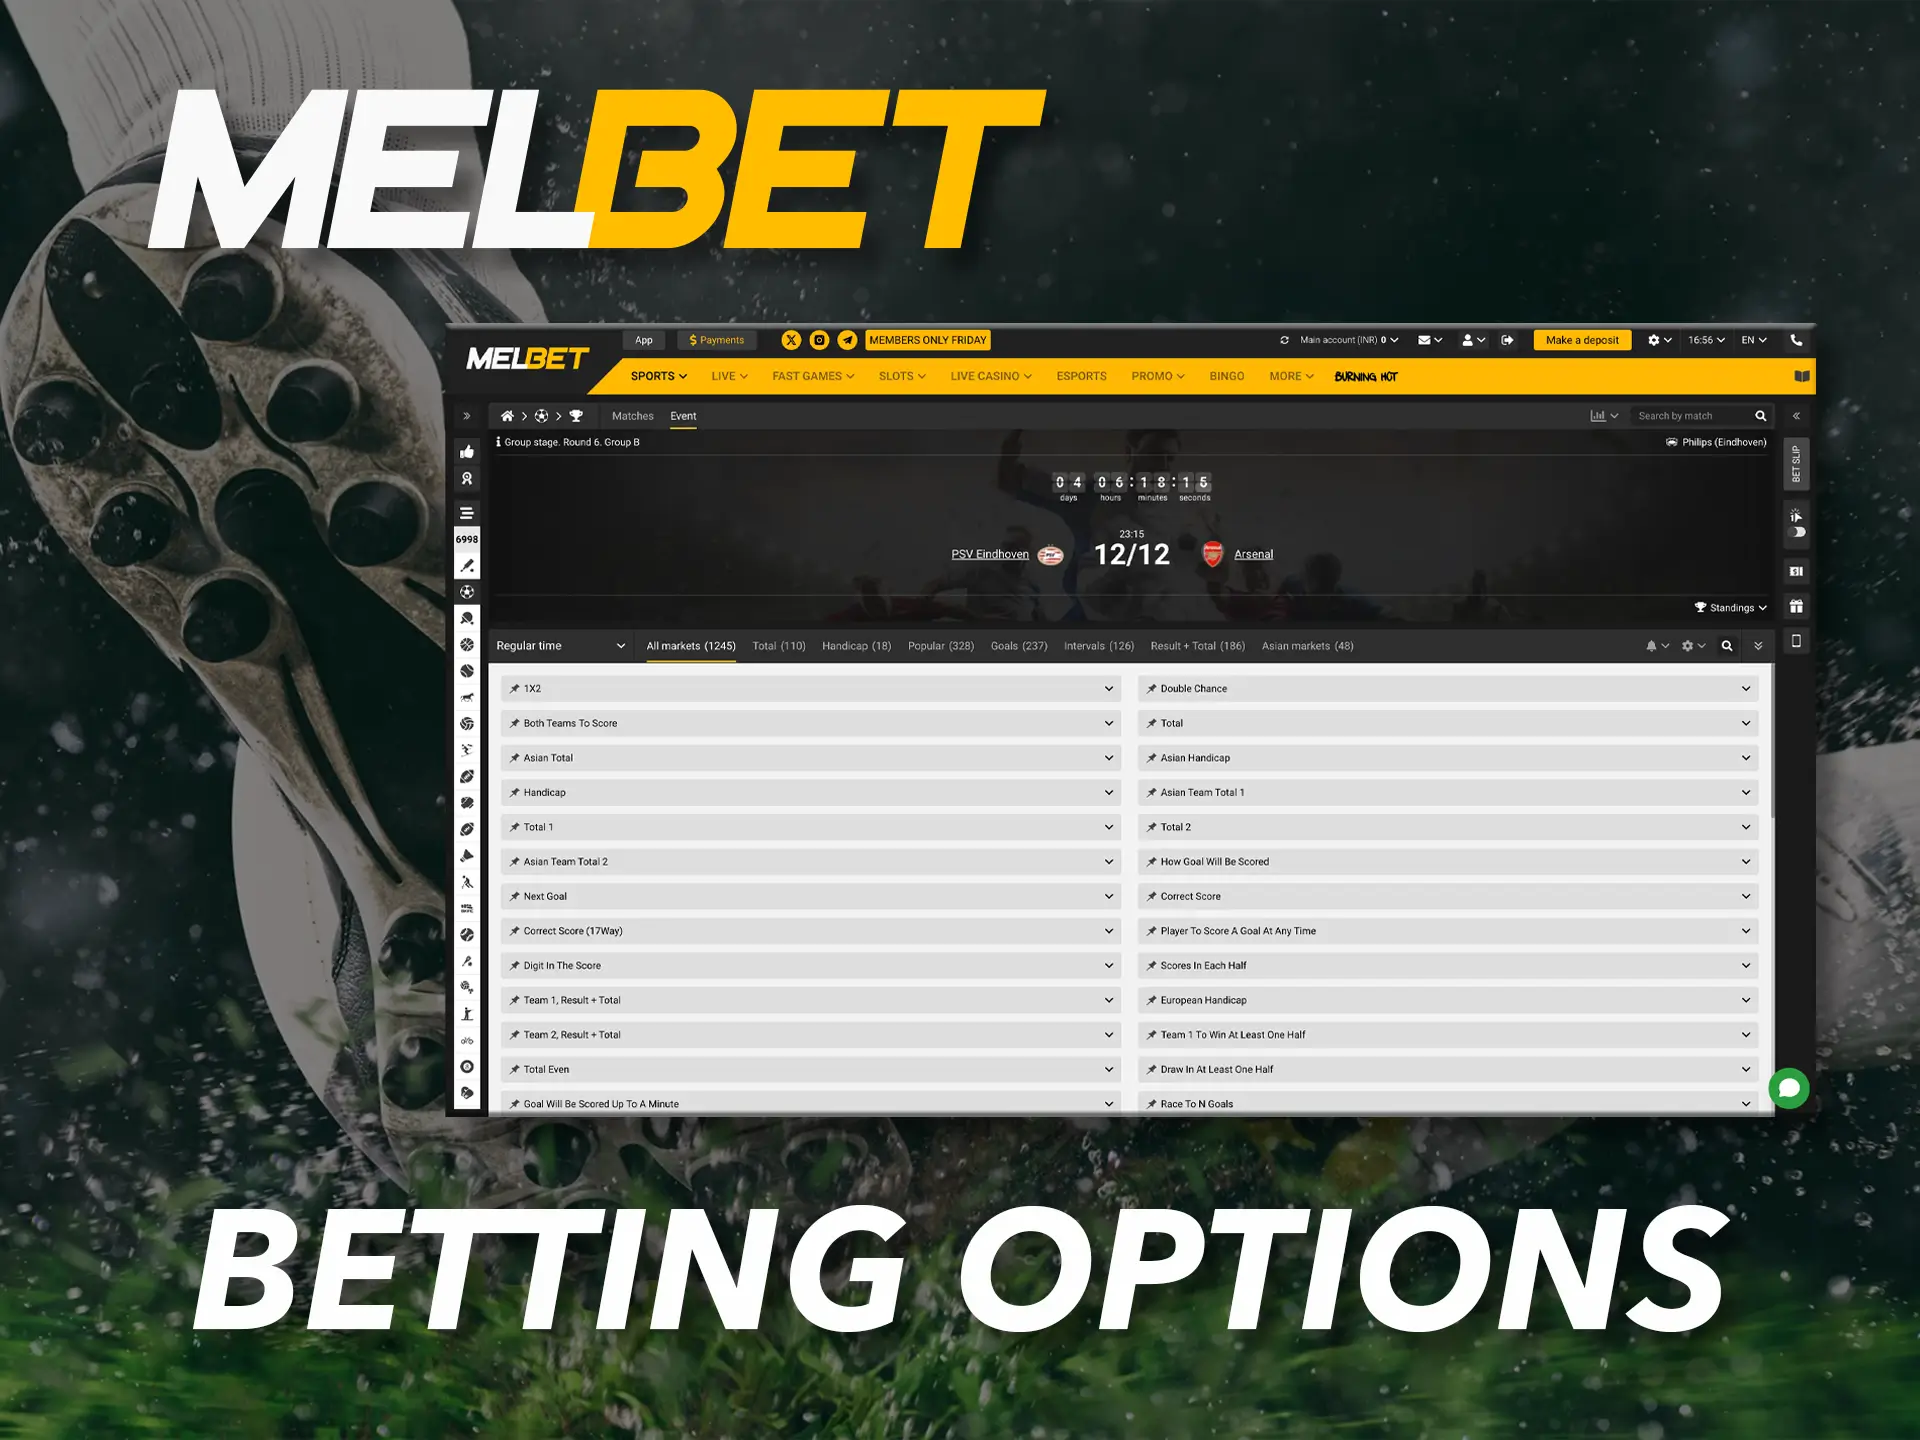 The variety of bets at Melbet gives you the opportunity for a successful preview of a sporting event.